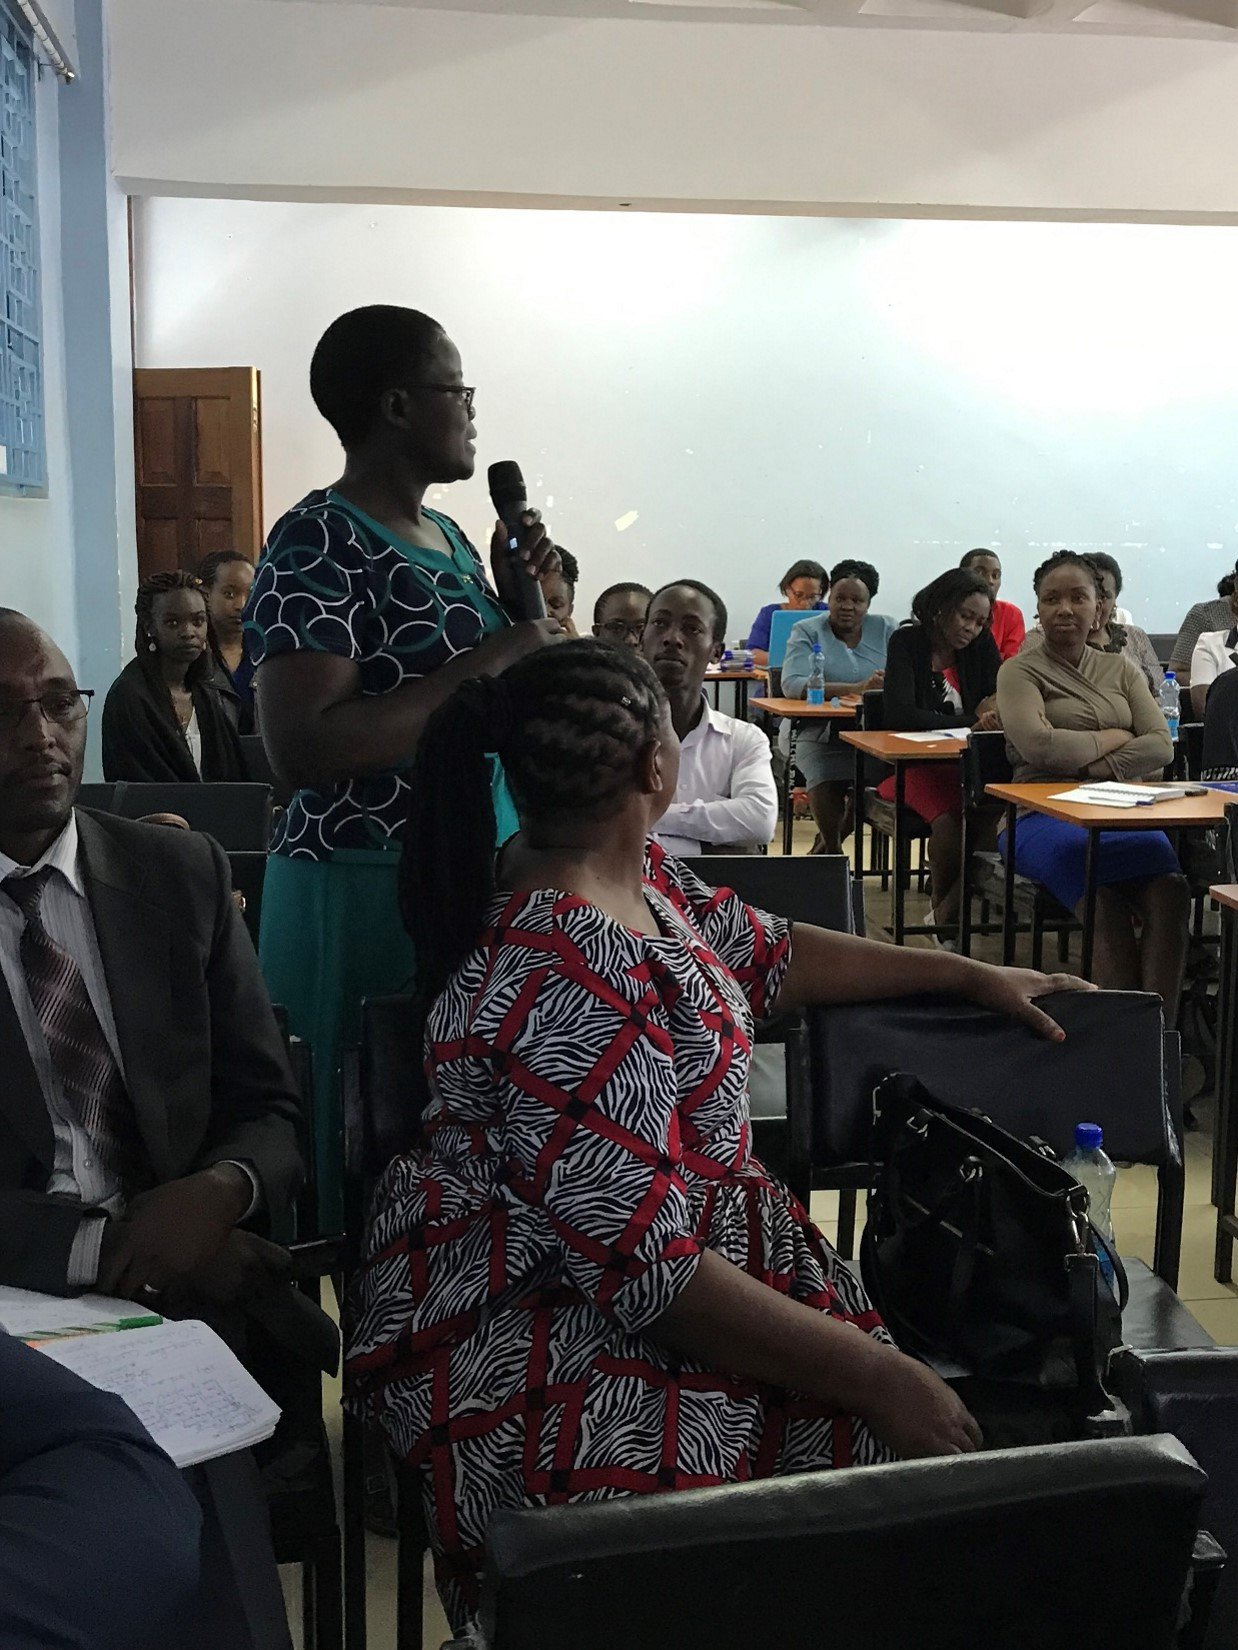  In 2019 IUSON, MTRH and MUSN collaborated for the first Clinical Nurse Educators Symposium. The symposium brought together nurses from North America and all of Uasin Gishu county to discuss innovations in nursing science and research that impact pat